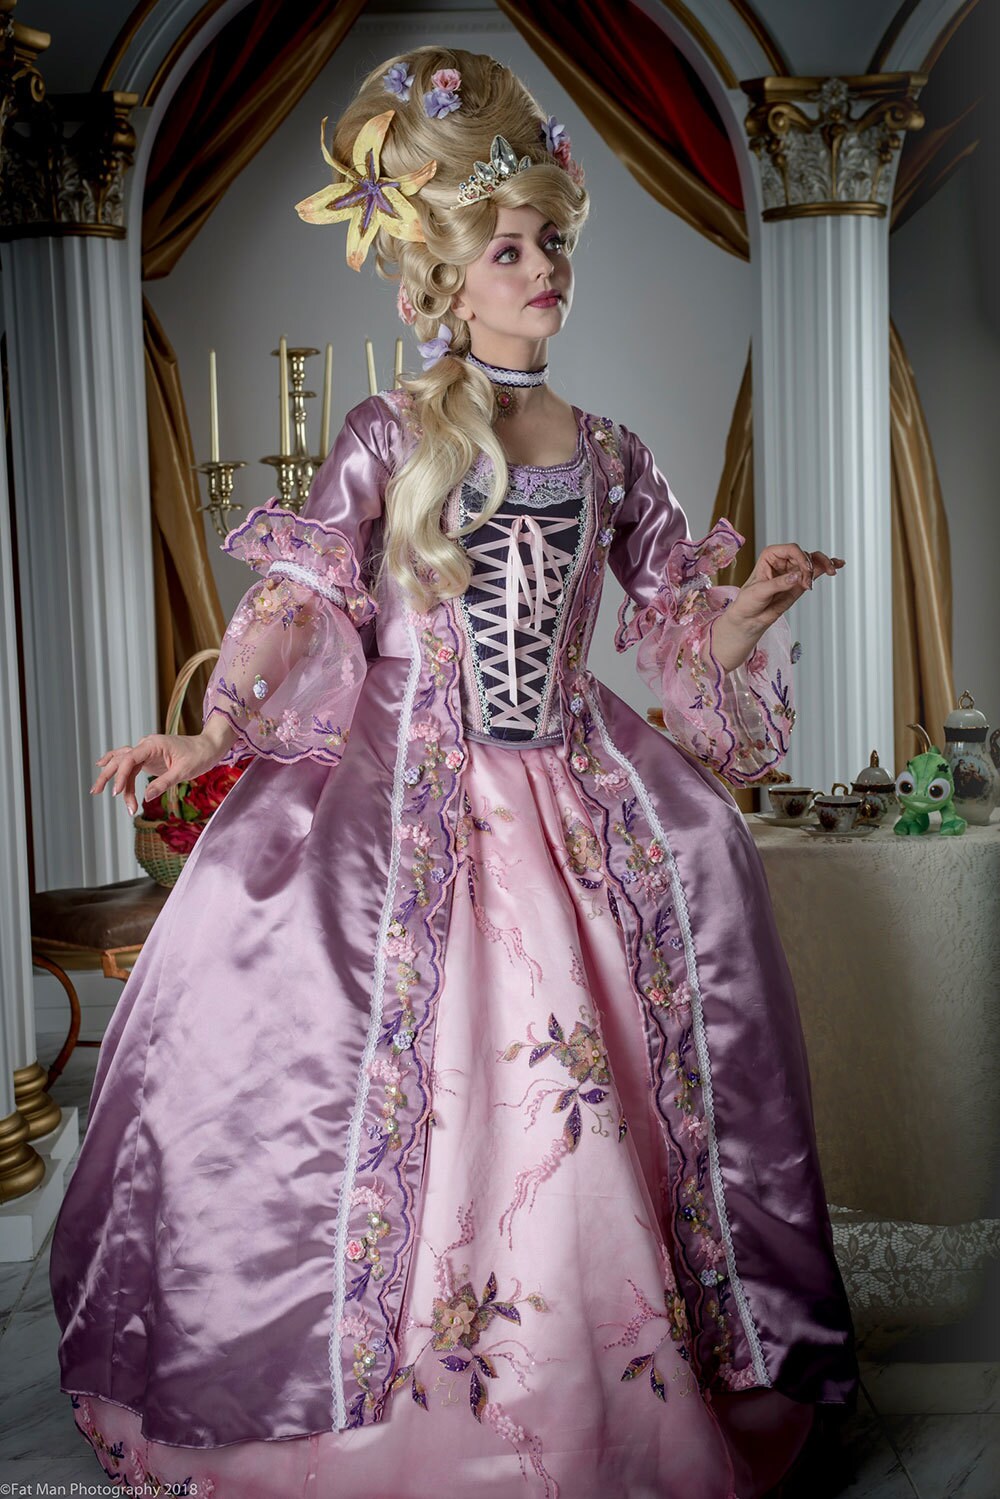 Joanna as Rapunzel in Rococo Princess-Inspired Photoshoot